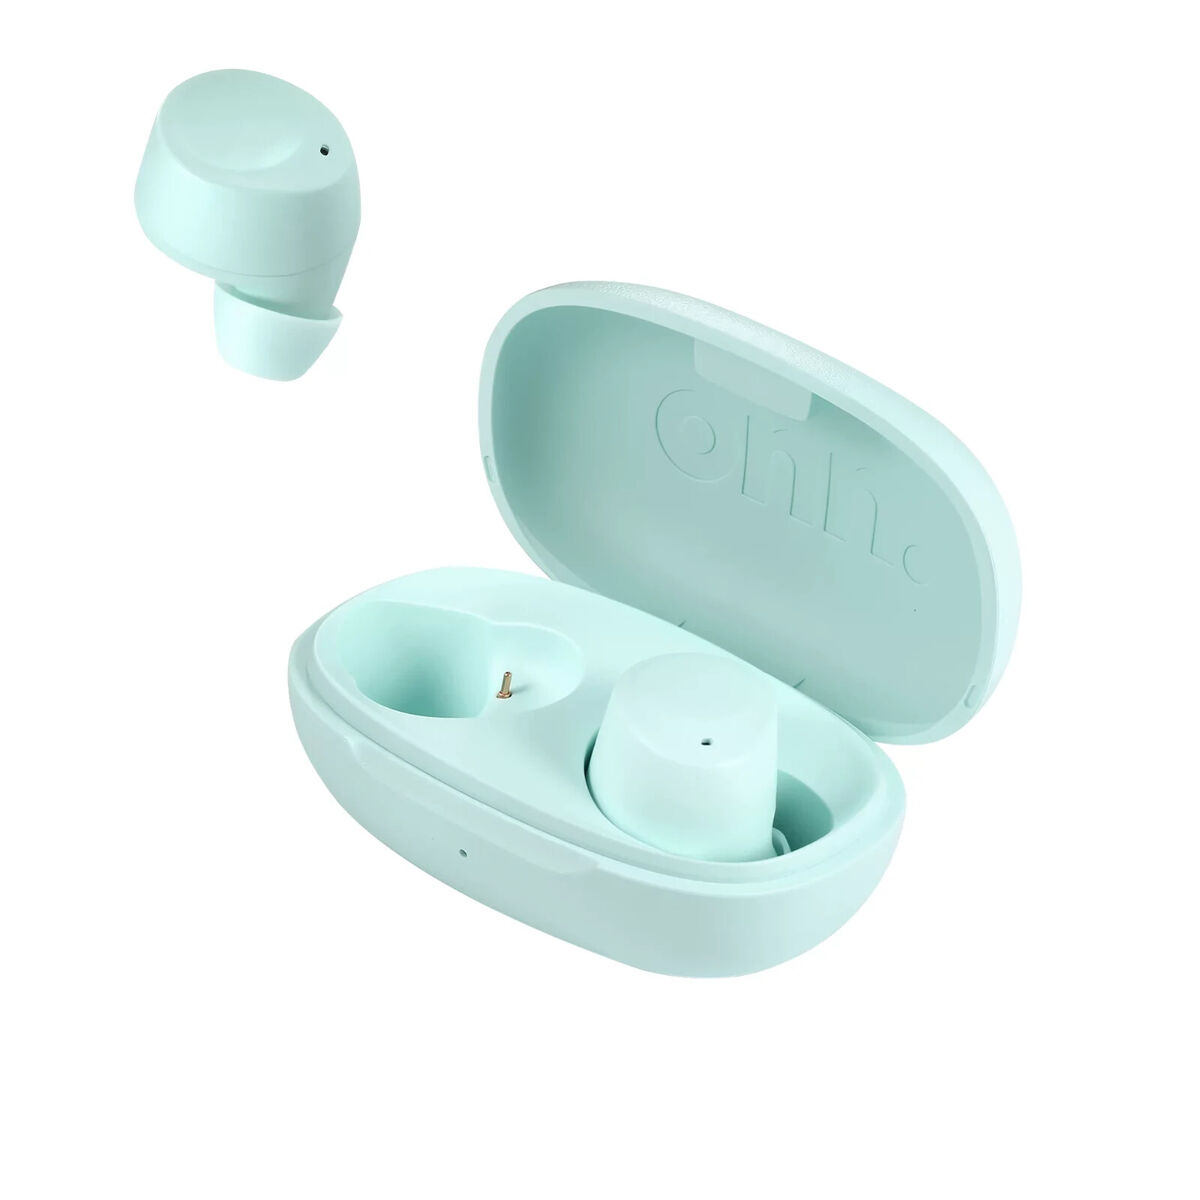 onn-earbuds-harmony-connecting-bluetooth-earbuds-to-iphone